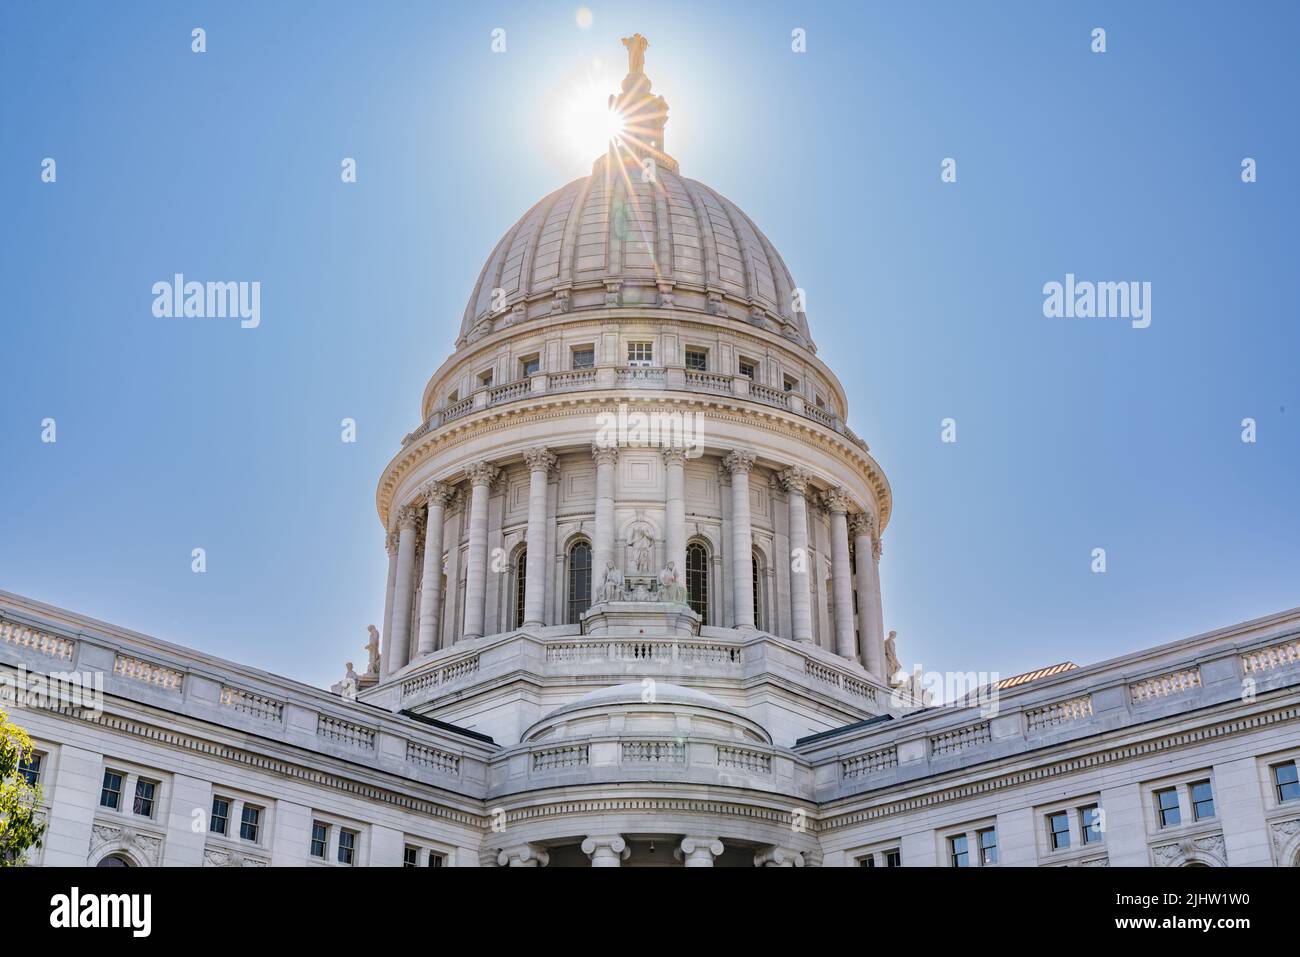 Dome of the Wisconsin State Capitol Building in Madison, Wisconsin Stock Photo